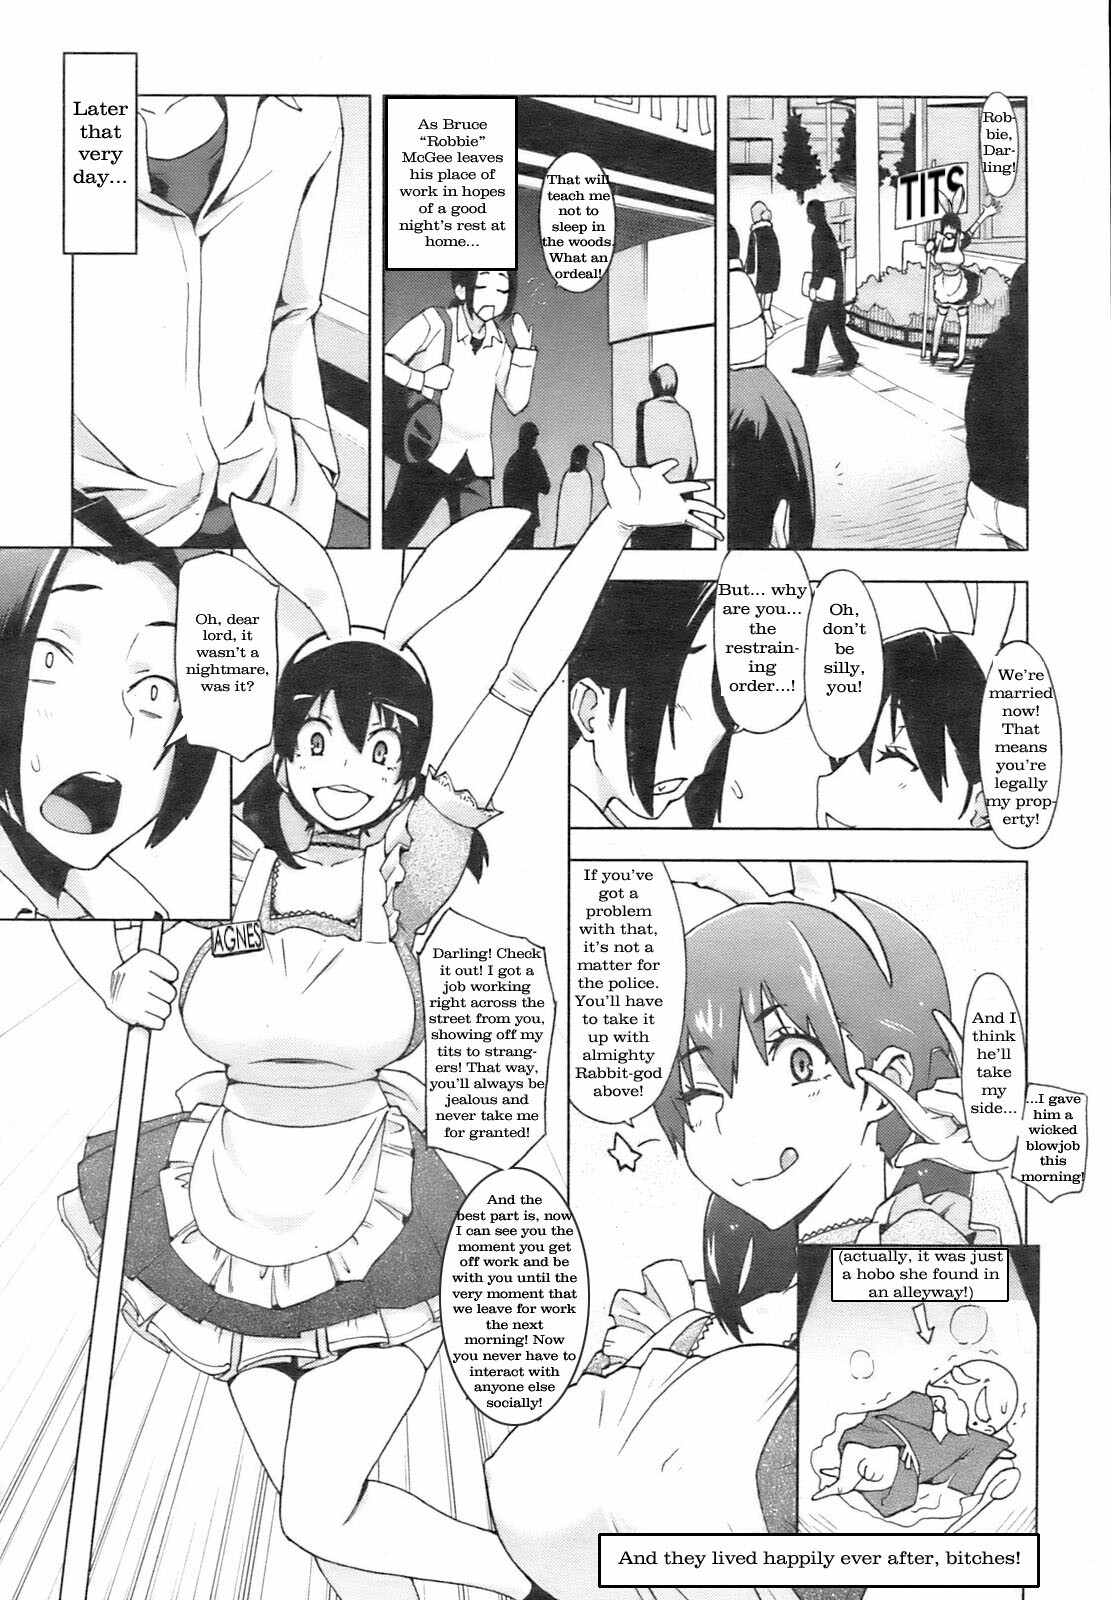 You are Most Certainly not a Rabbit, and I am Most Certainly Not Attracted to you, you Vile Whore! [English] [Rewrite] [Newdog15] page 18 full